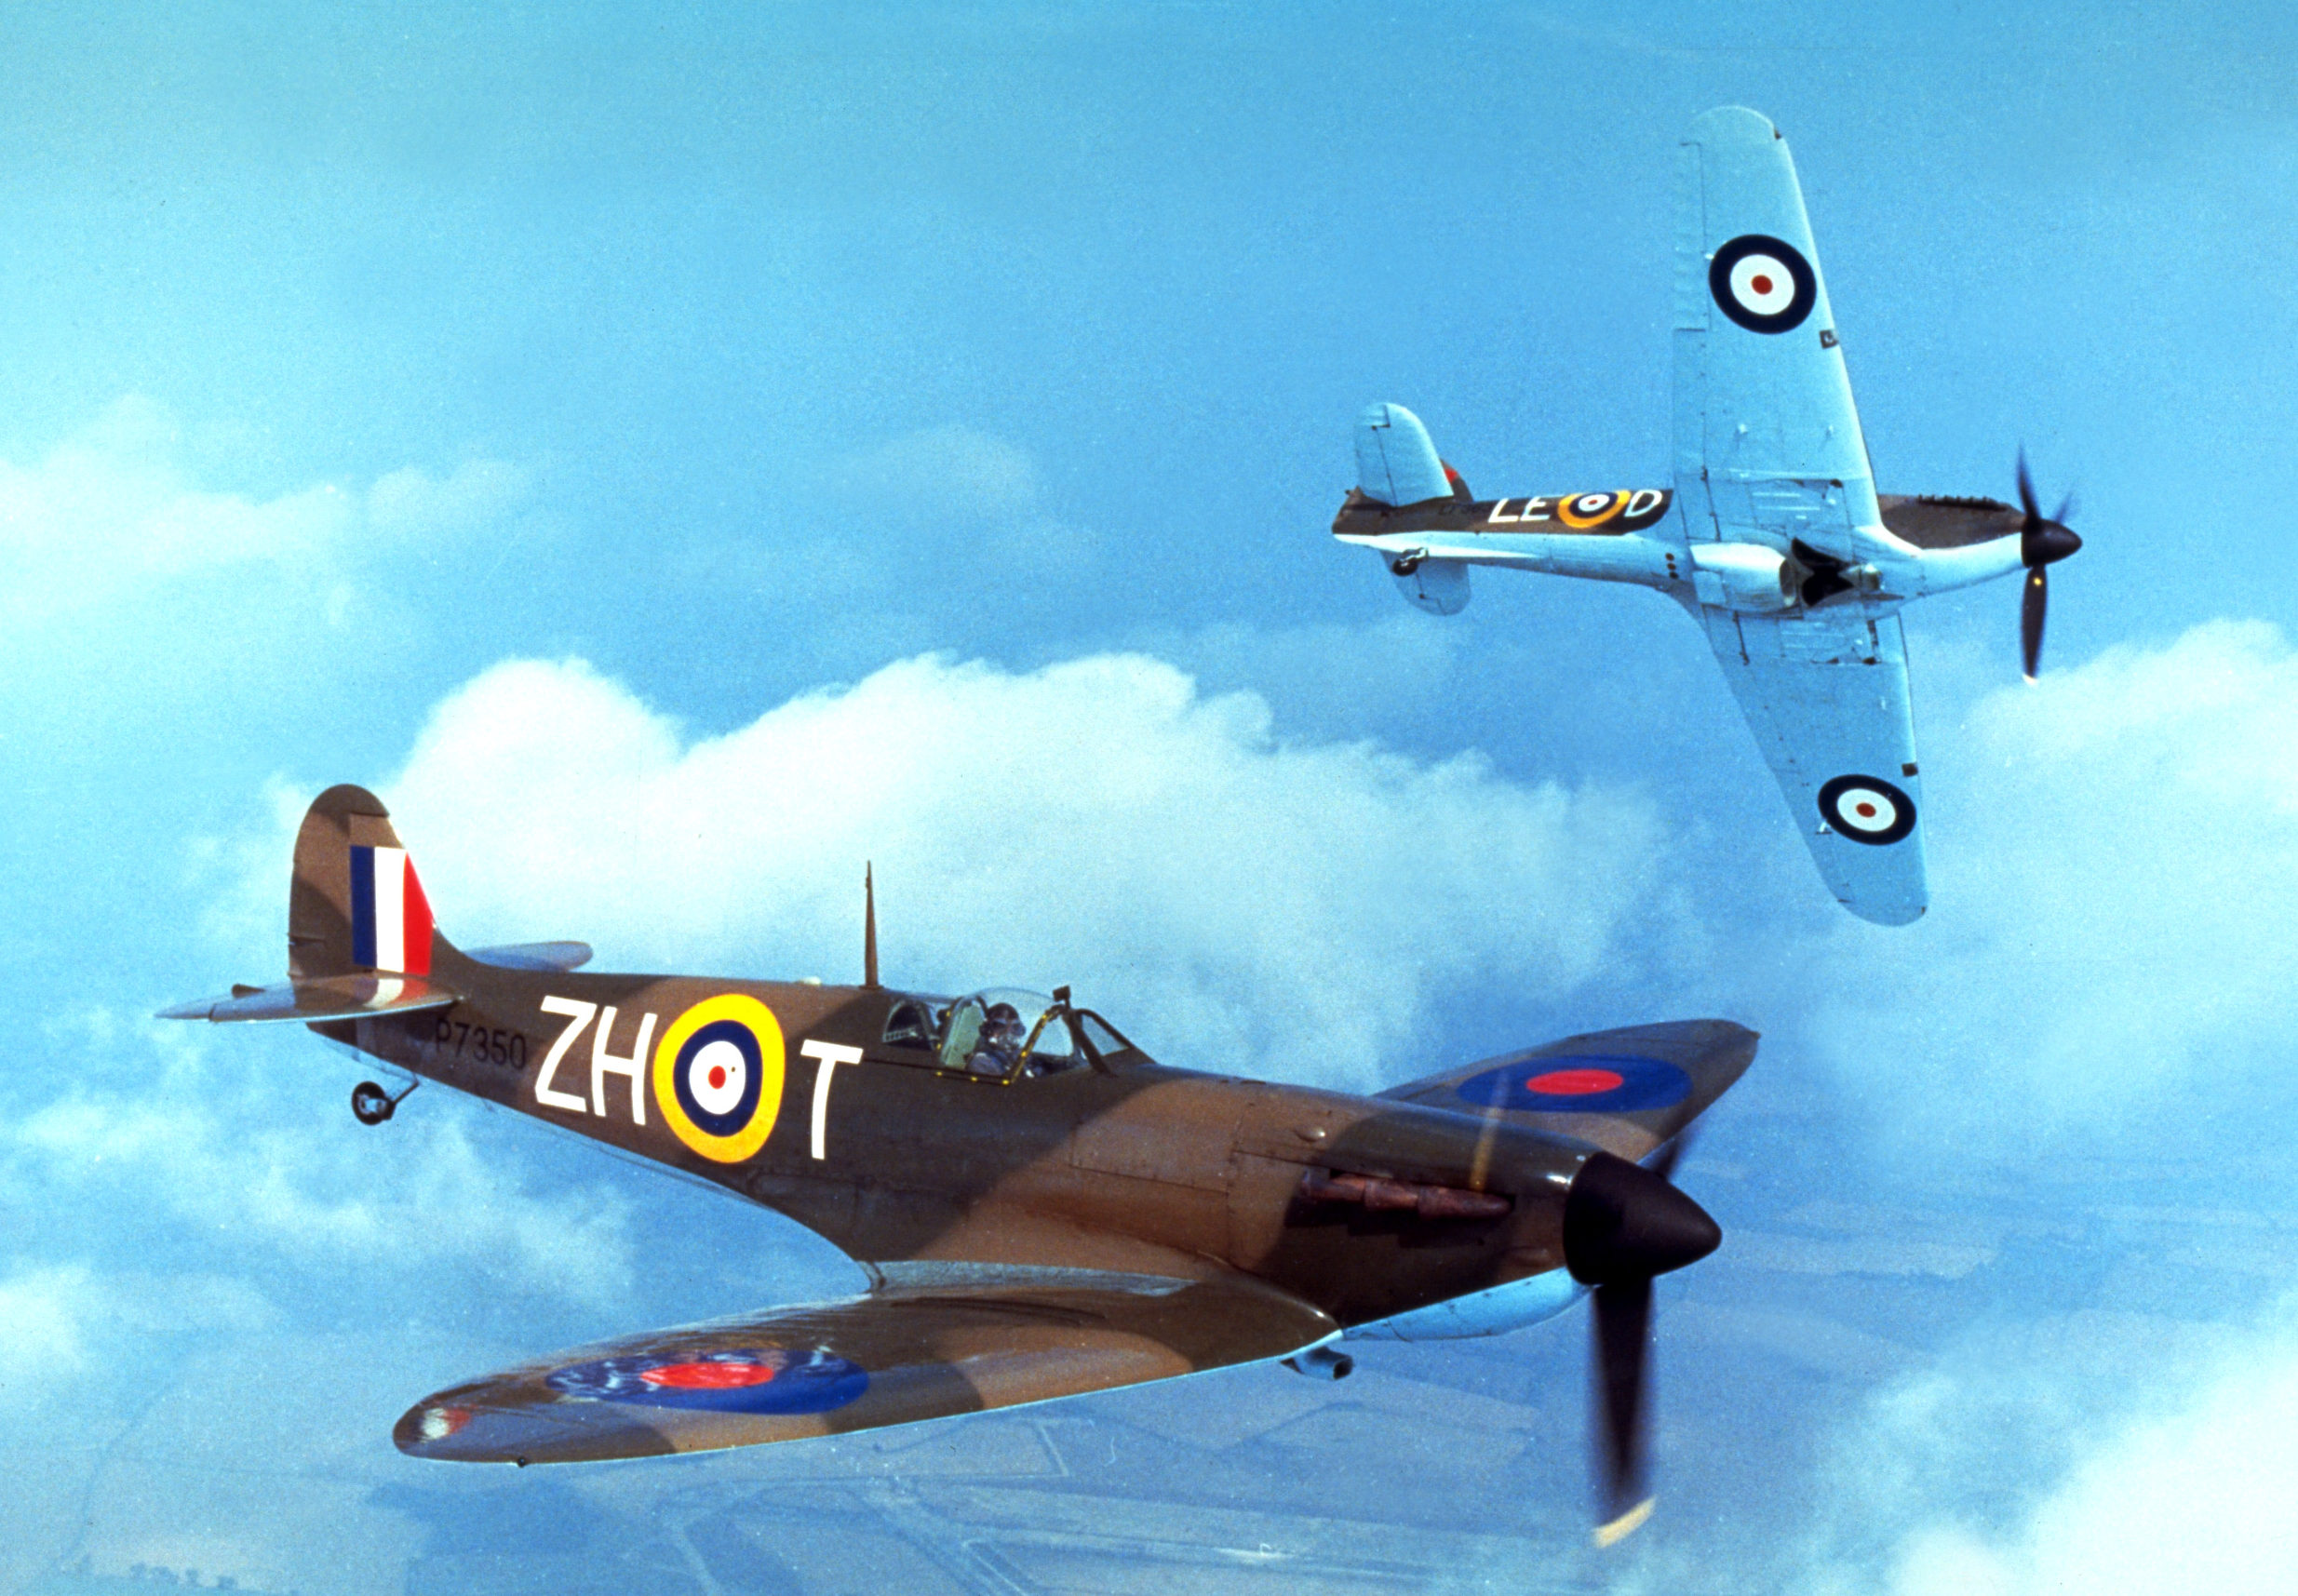 Battle of Britain is 50 years old on September 16.